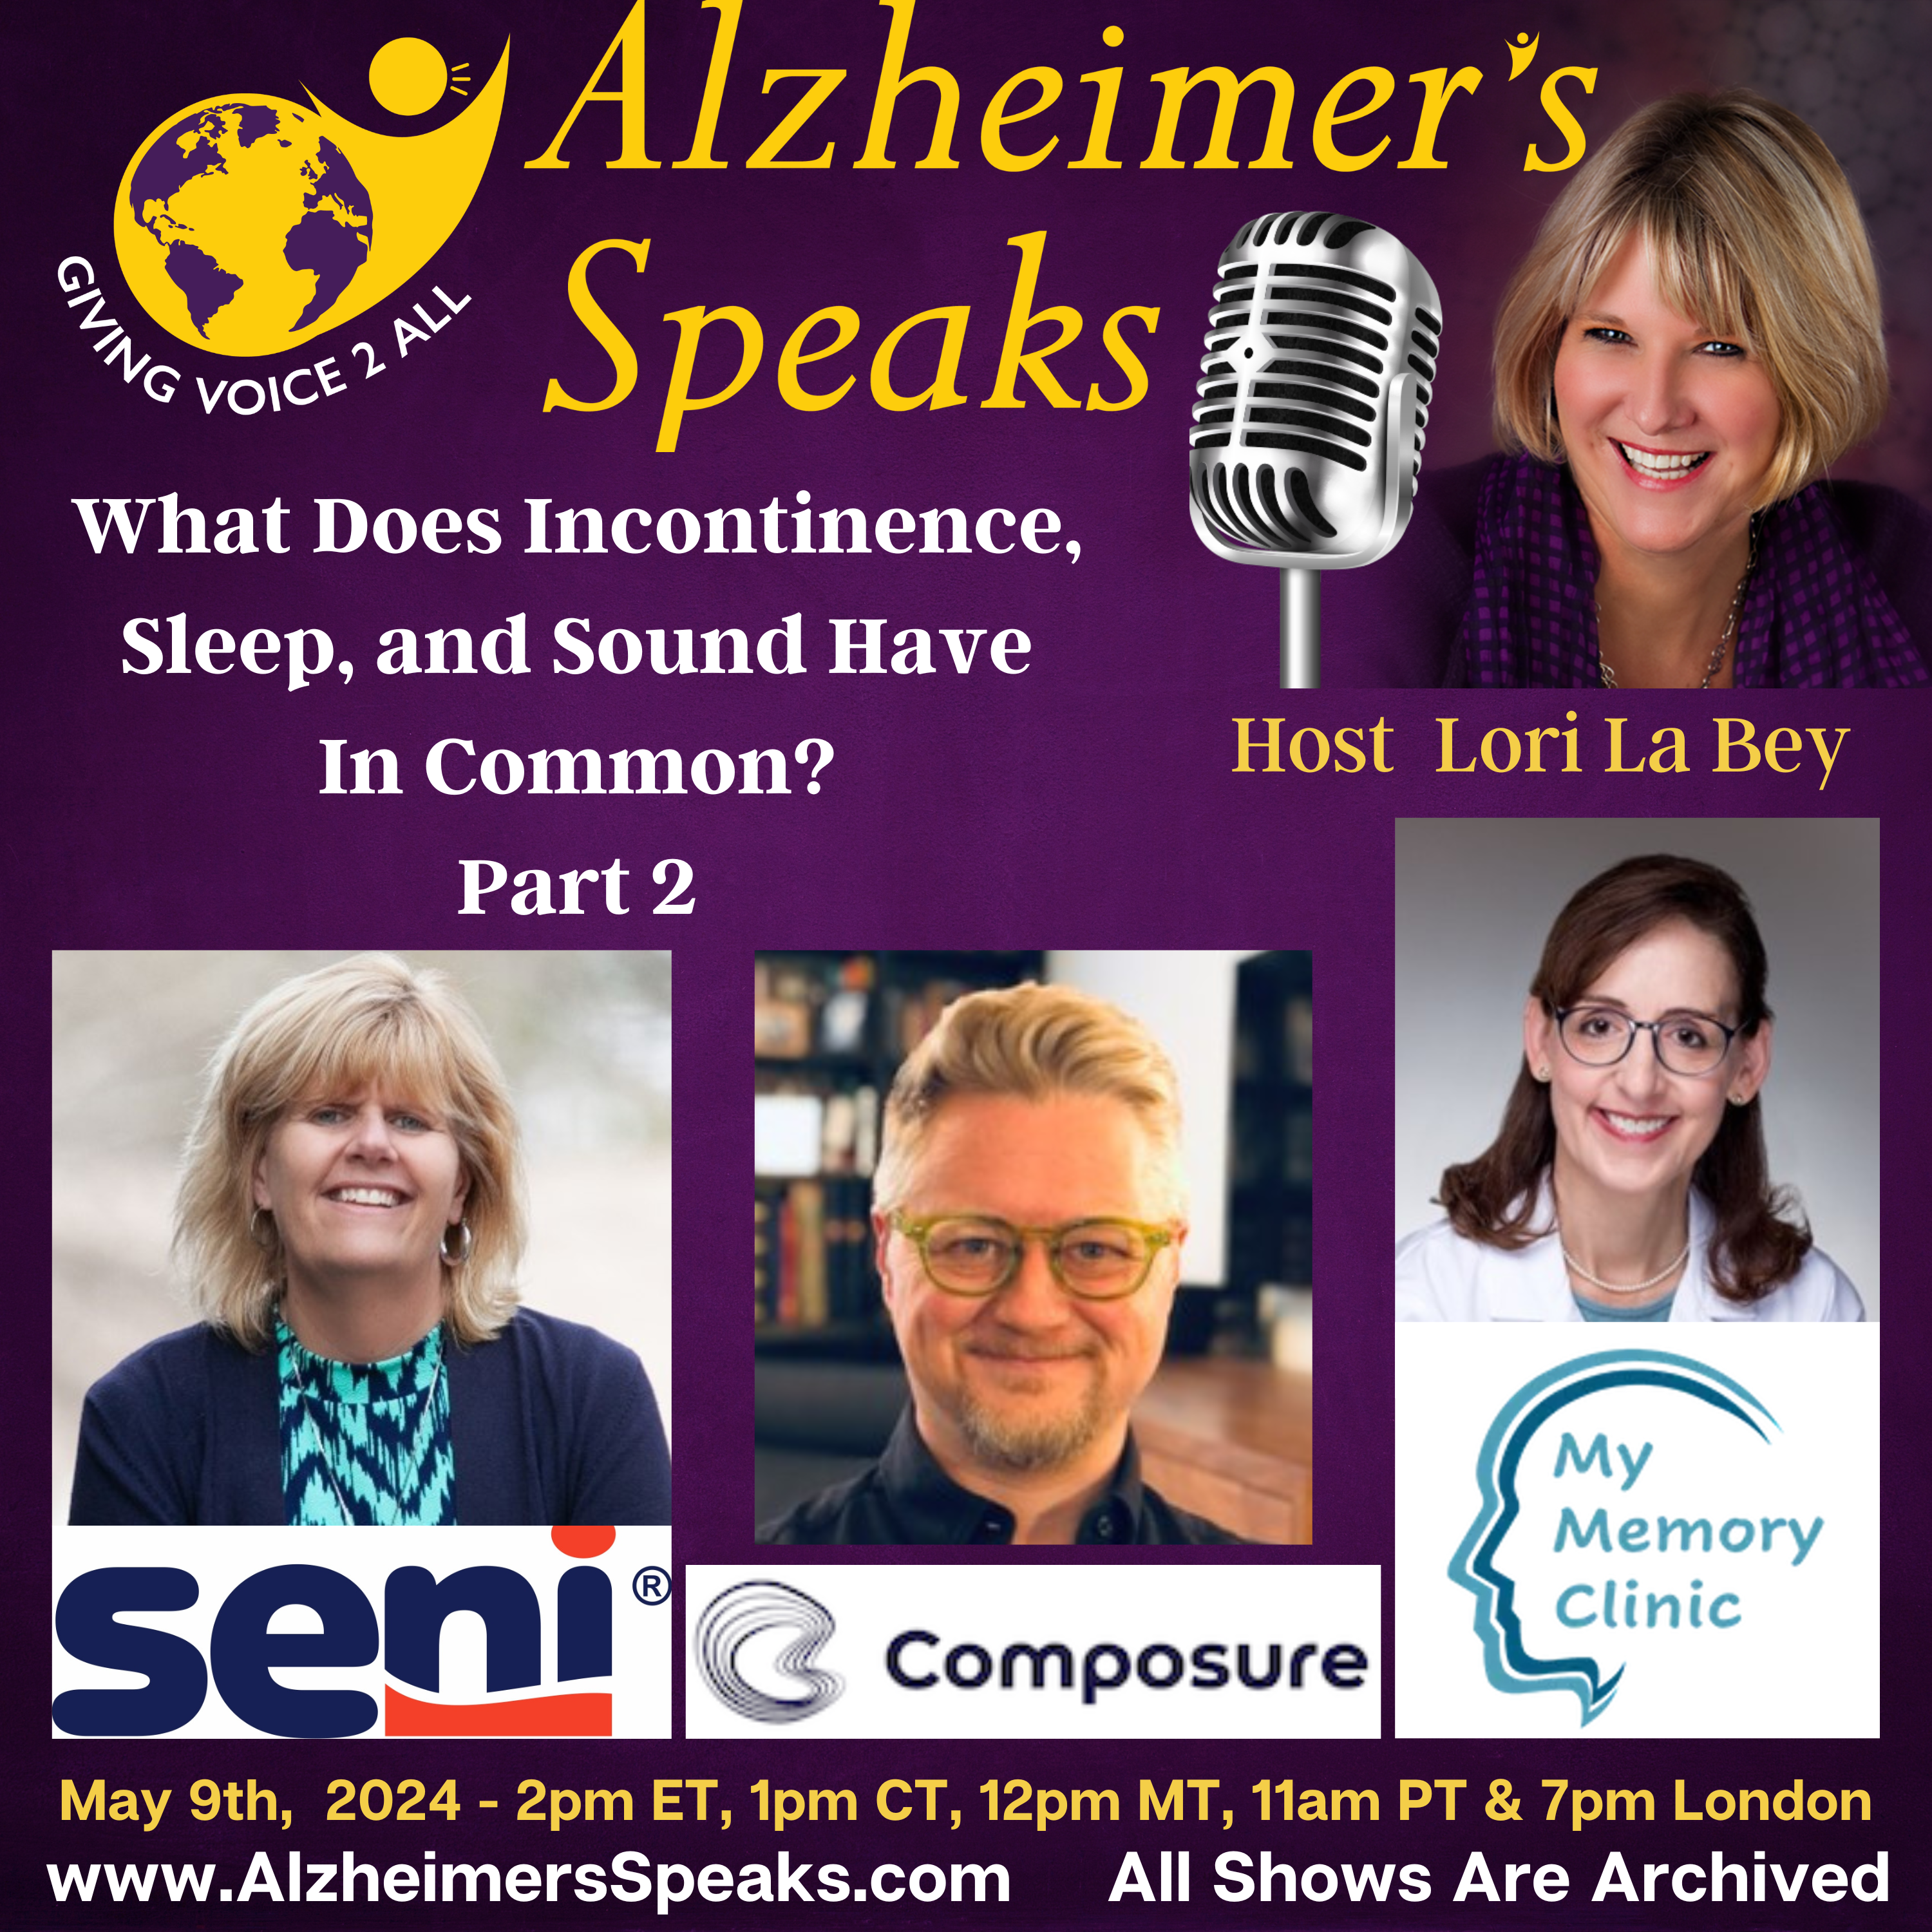 PART 2 of What Does Incontinence, Sound, and Sleep Have In Common?